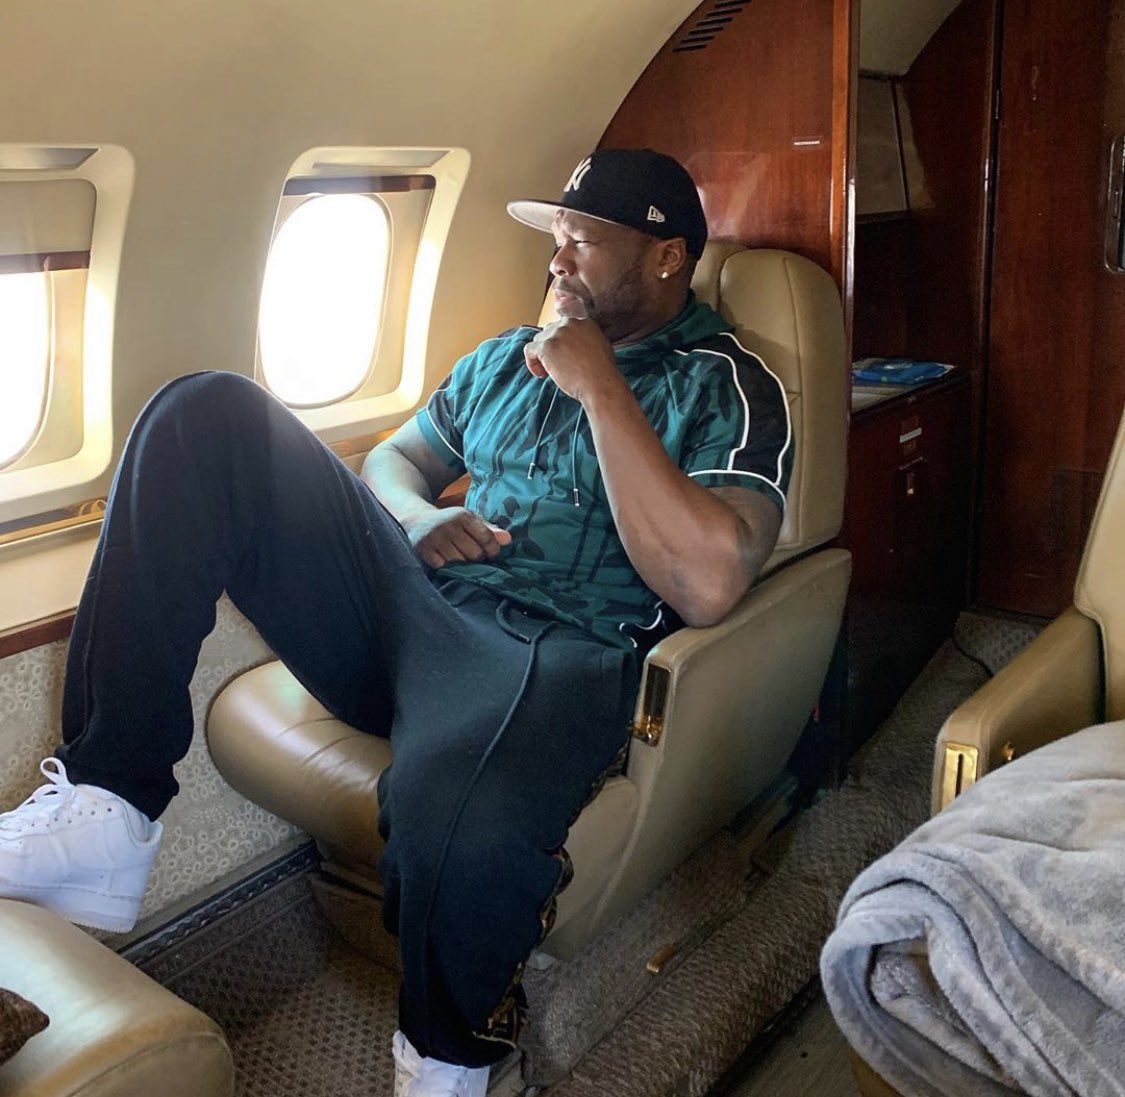 I’m on the move time to get busy, you know the Vibes. ????#lecheminduroi ????#bransoncognac https://t.co/ny19328m75